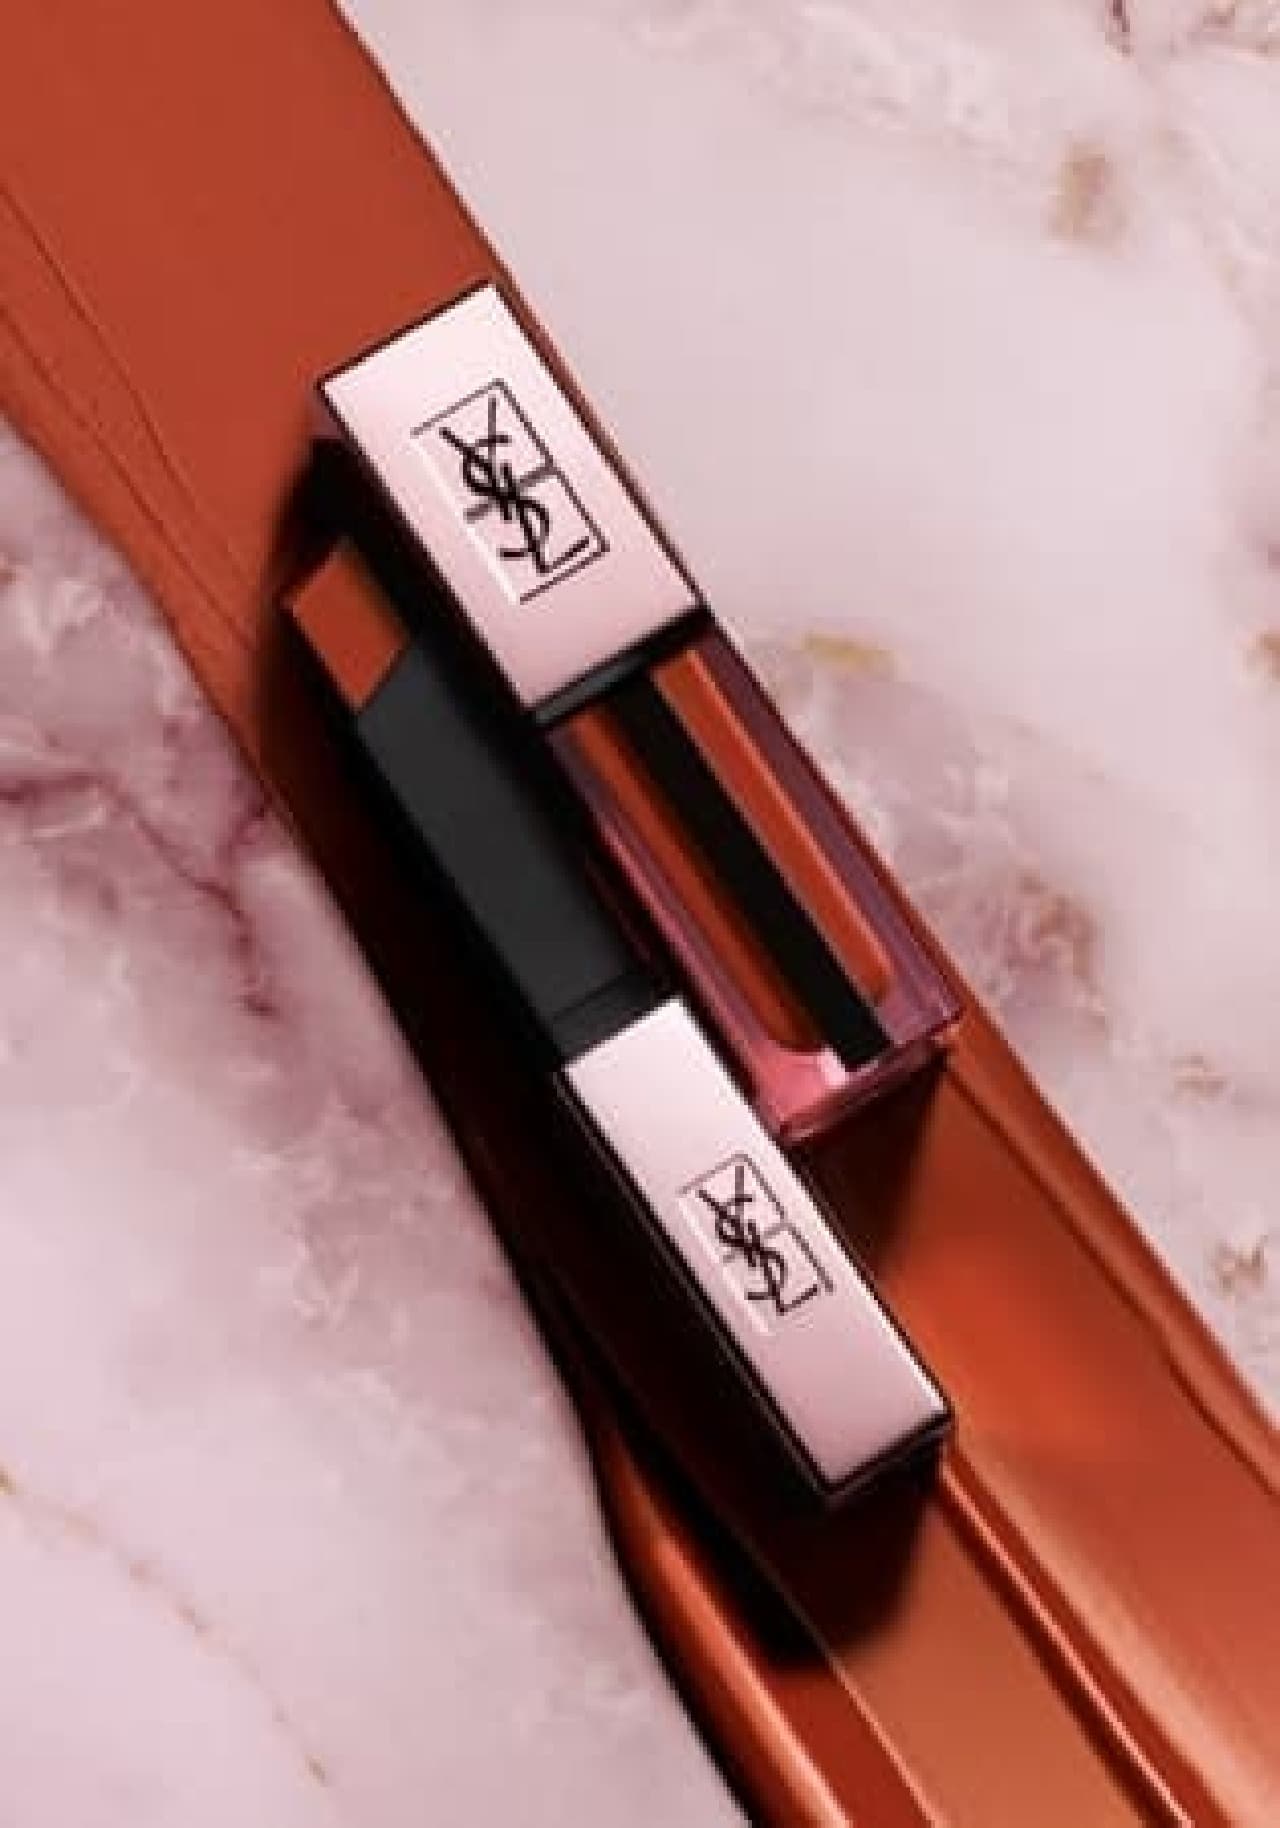 YSL's new lip collection "Irisit Nude"